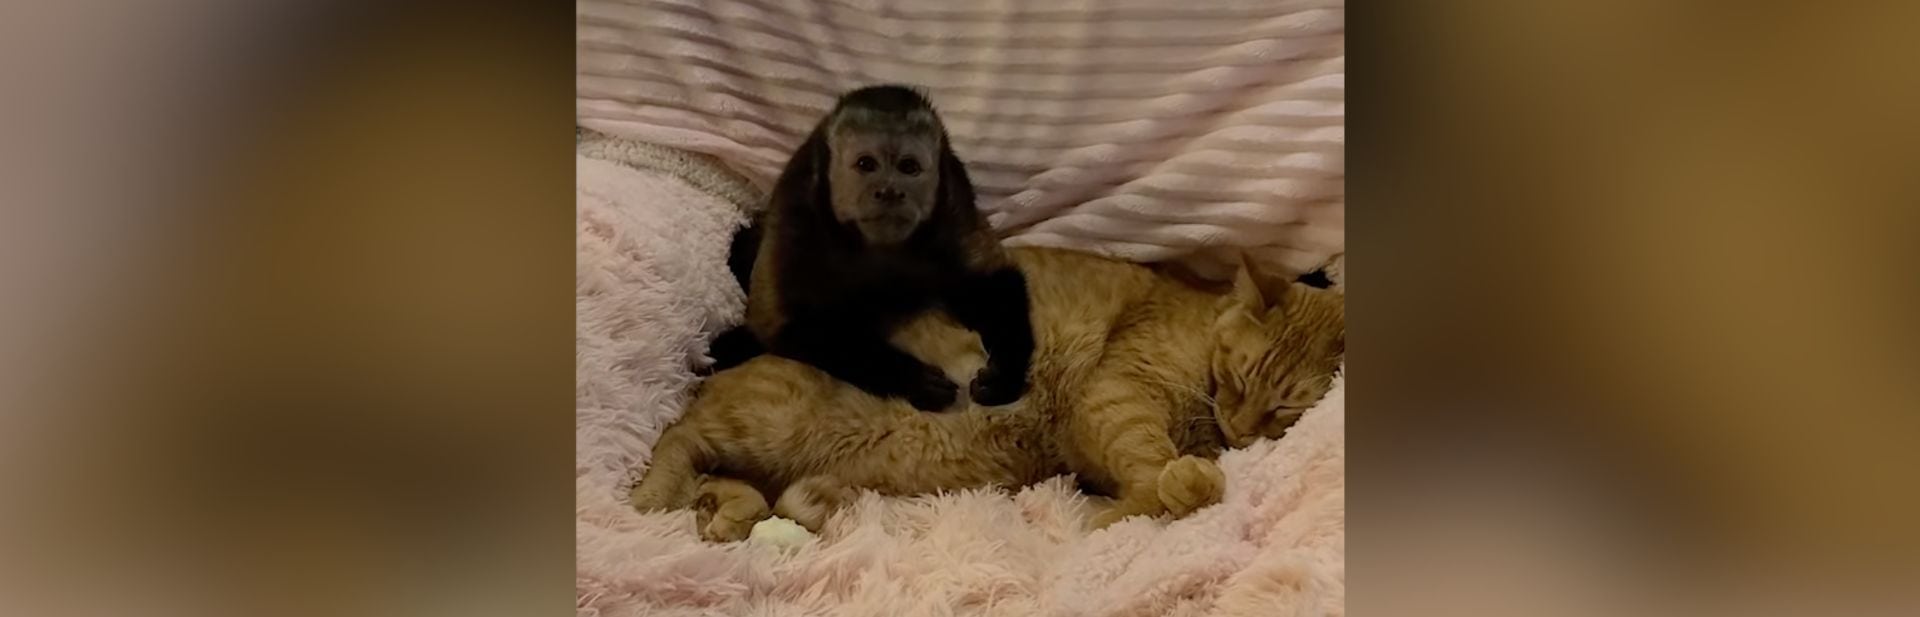 A Monkey and Cat Friendship Story That Will Melt Your Heart